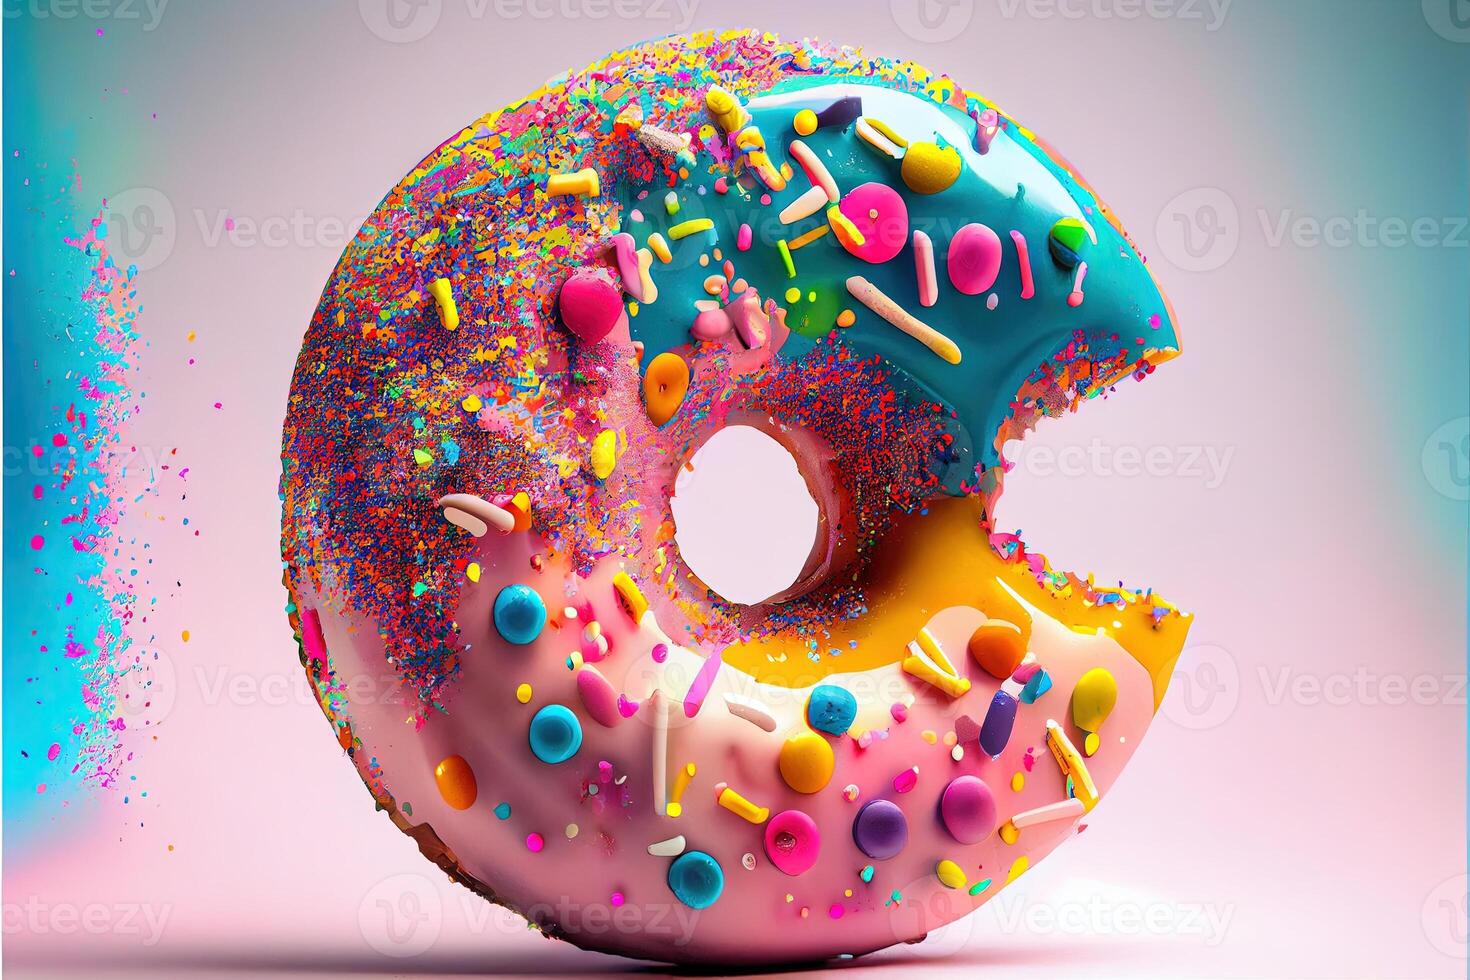 illustration of trippy doughnut collage detailed vibrant colors, splatters, giant glistening doughnut , floating in free space, pastel back drop. Digitally generated image photo